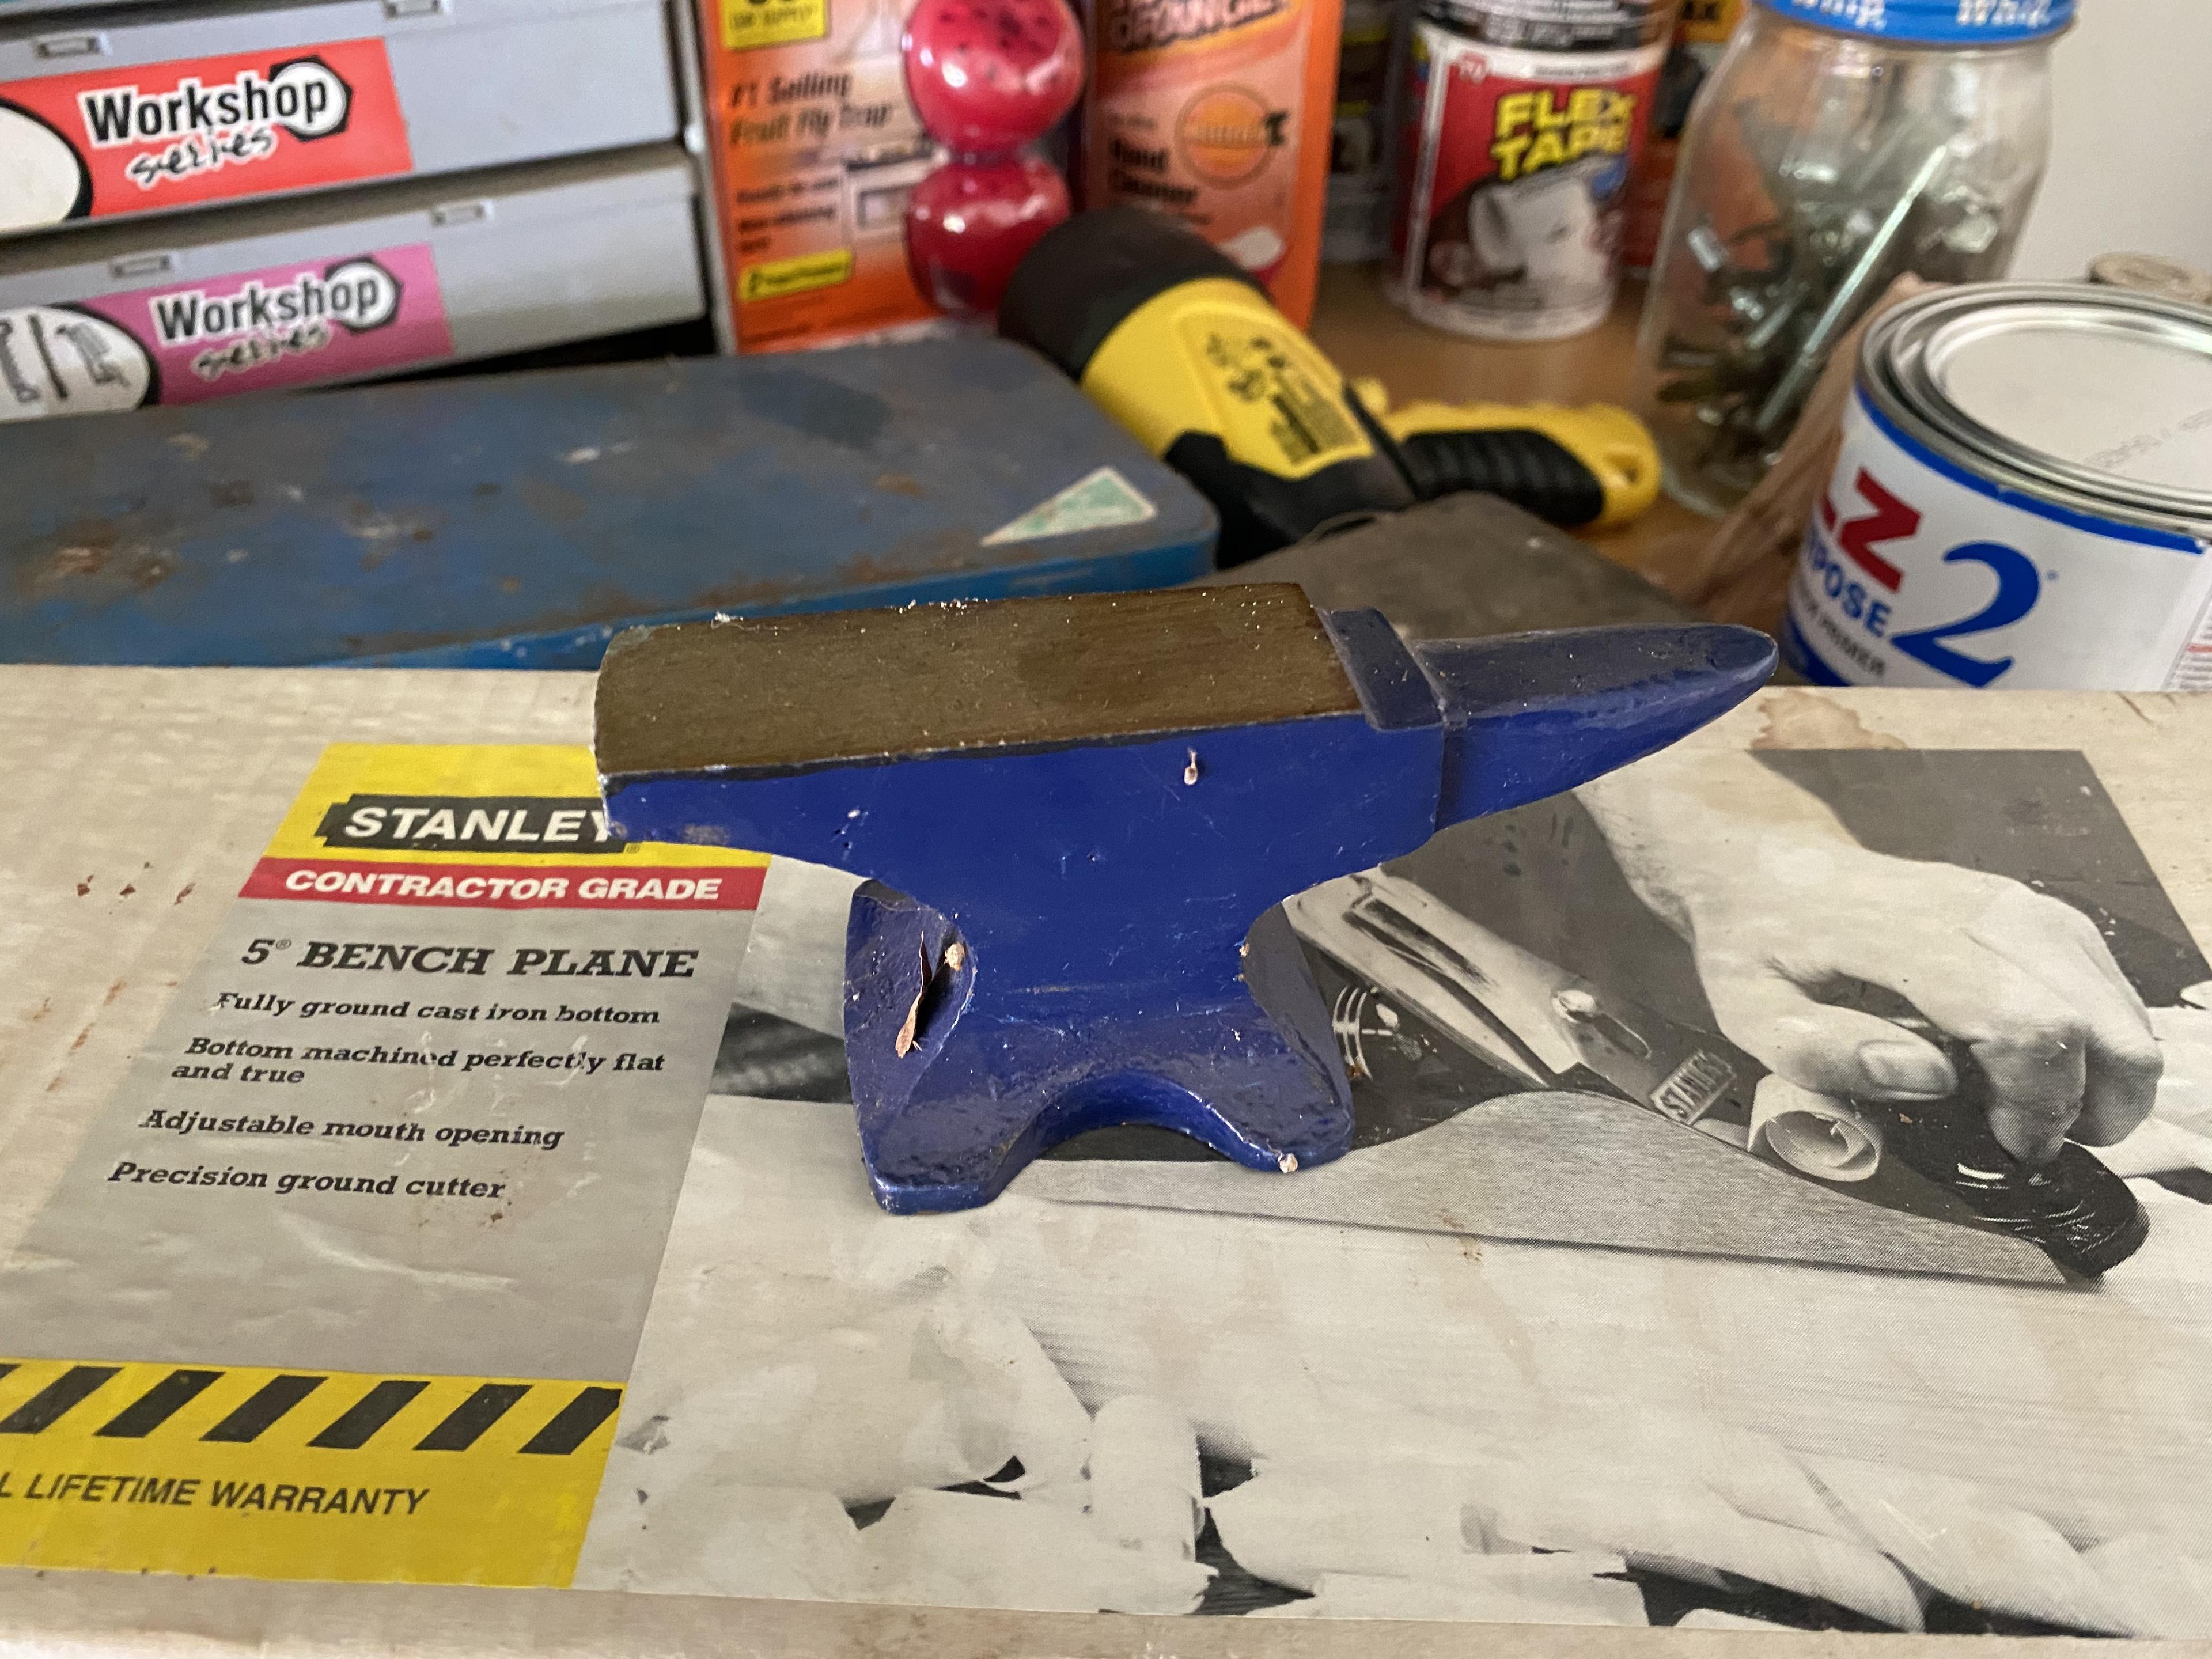 Items on right side of tool bench including anvil, plane in box